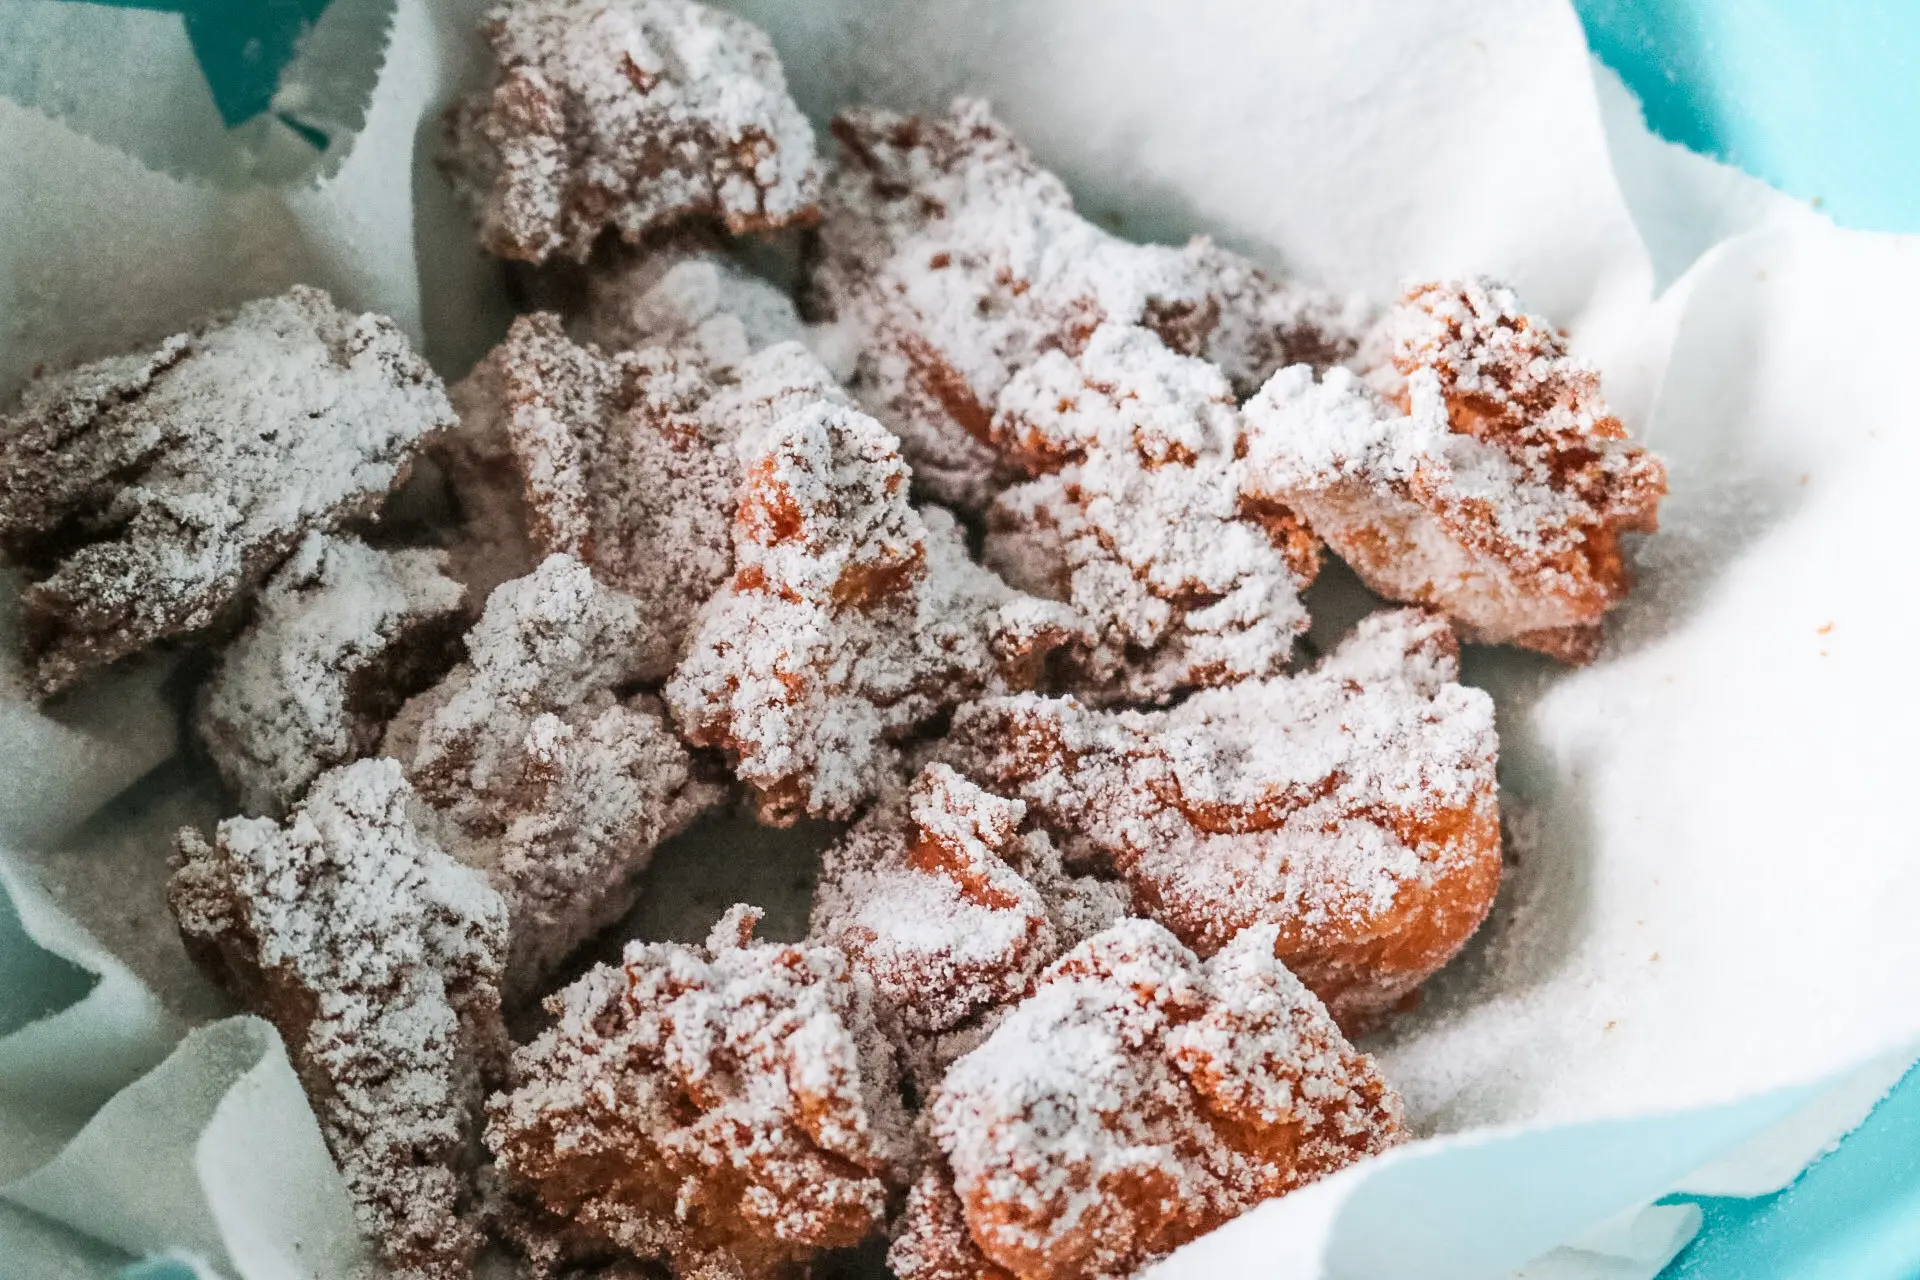 Zeppole (fried Italian donuts) coated in powdered sugar in bowl with paper towels